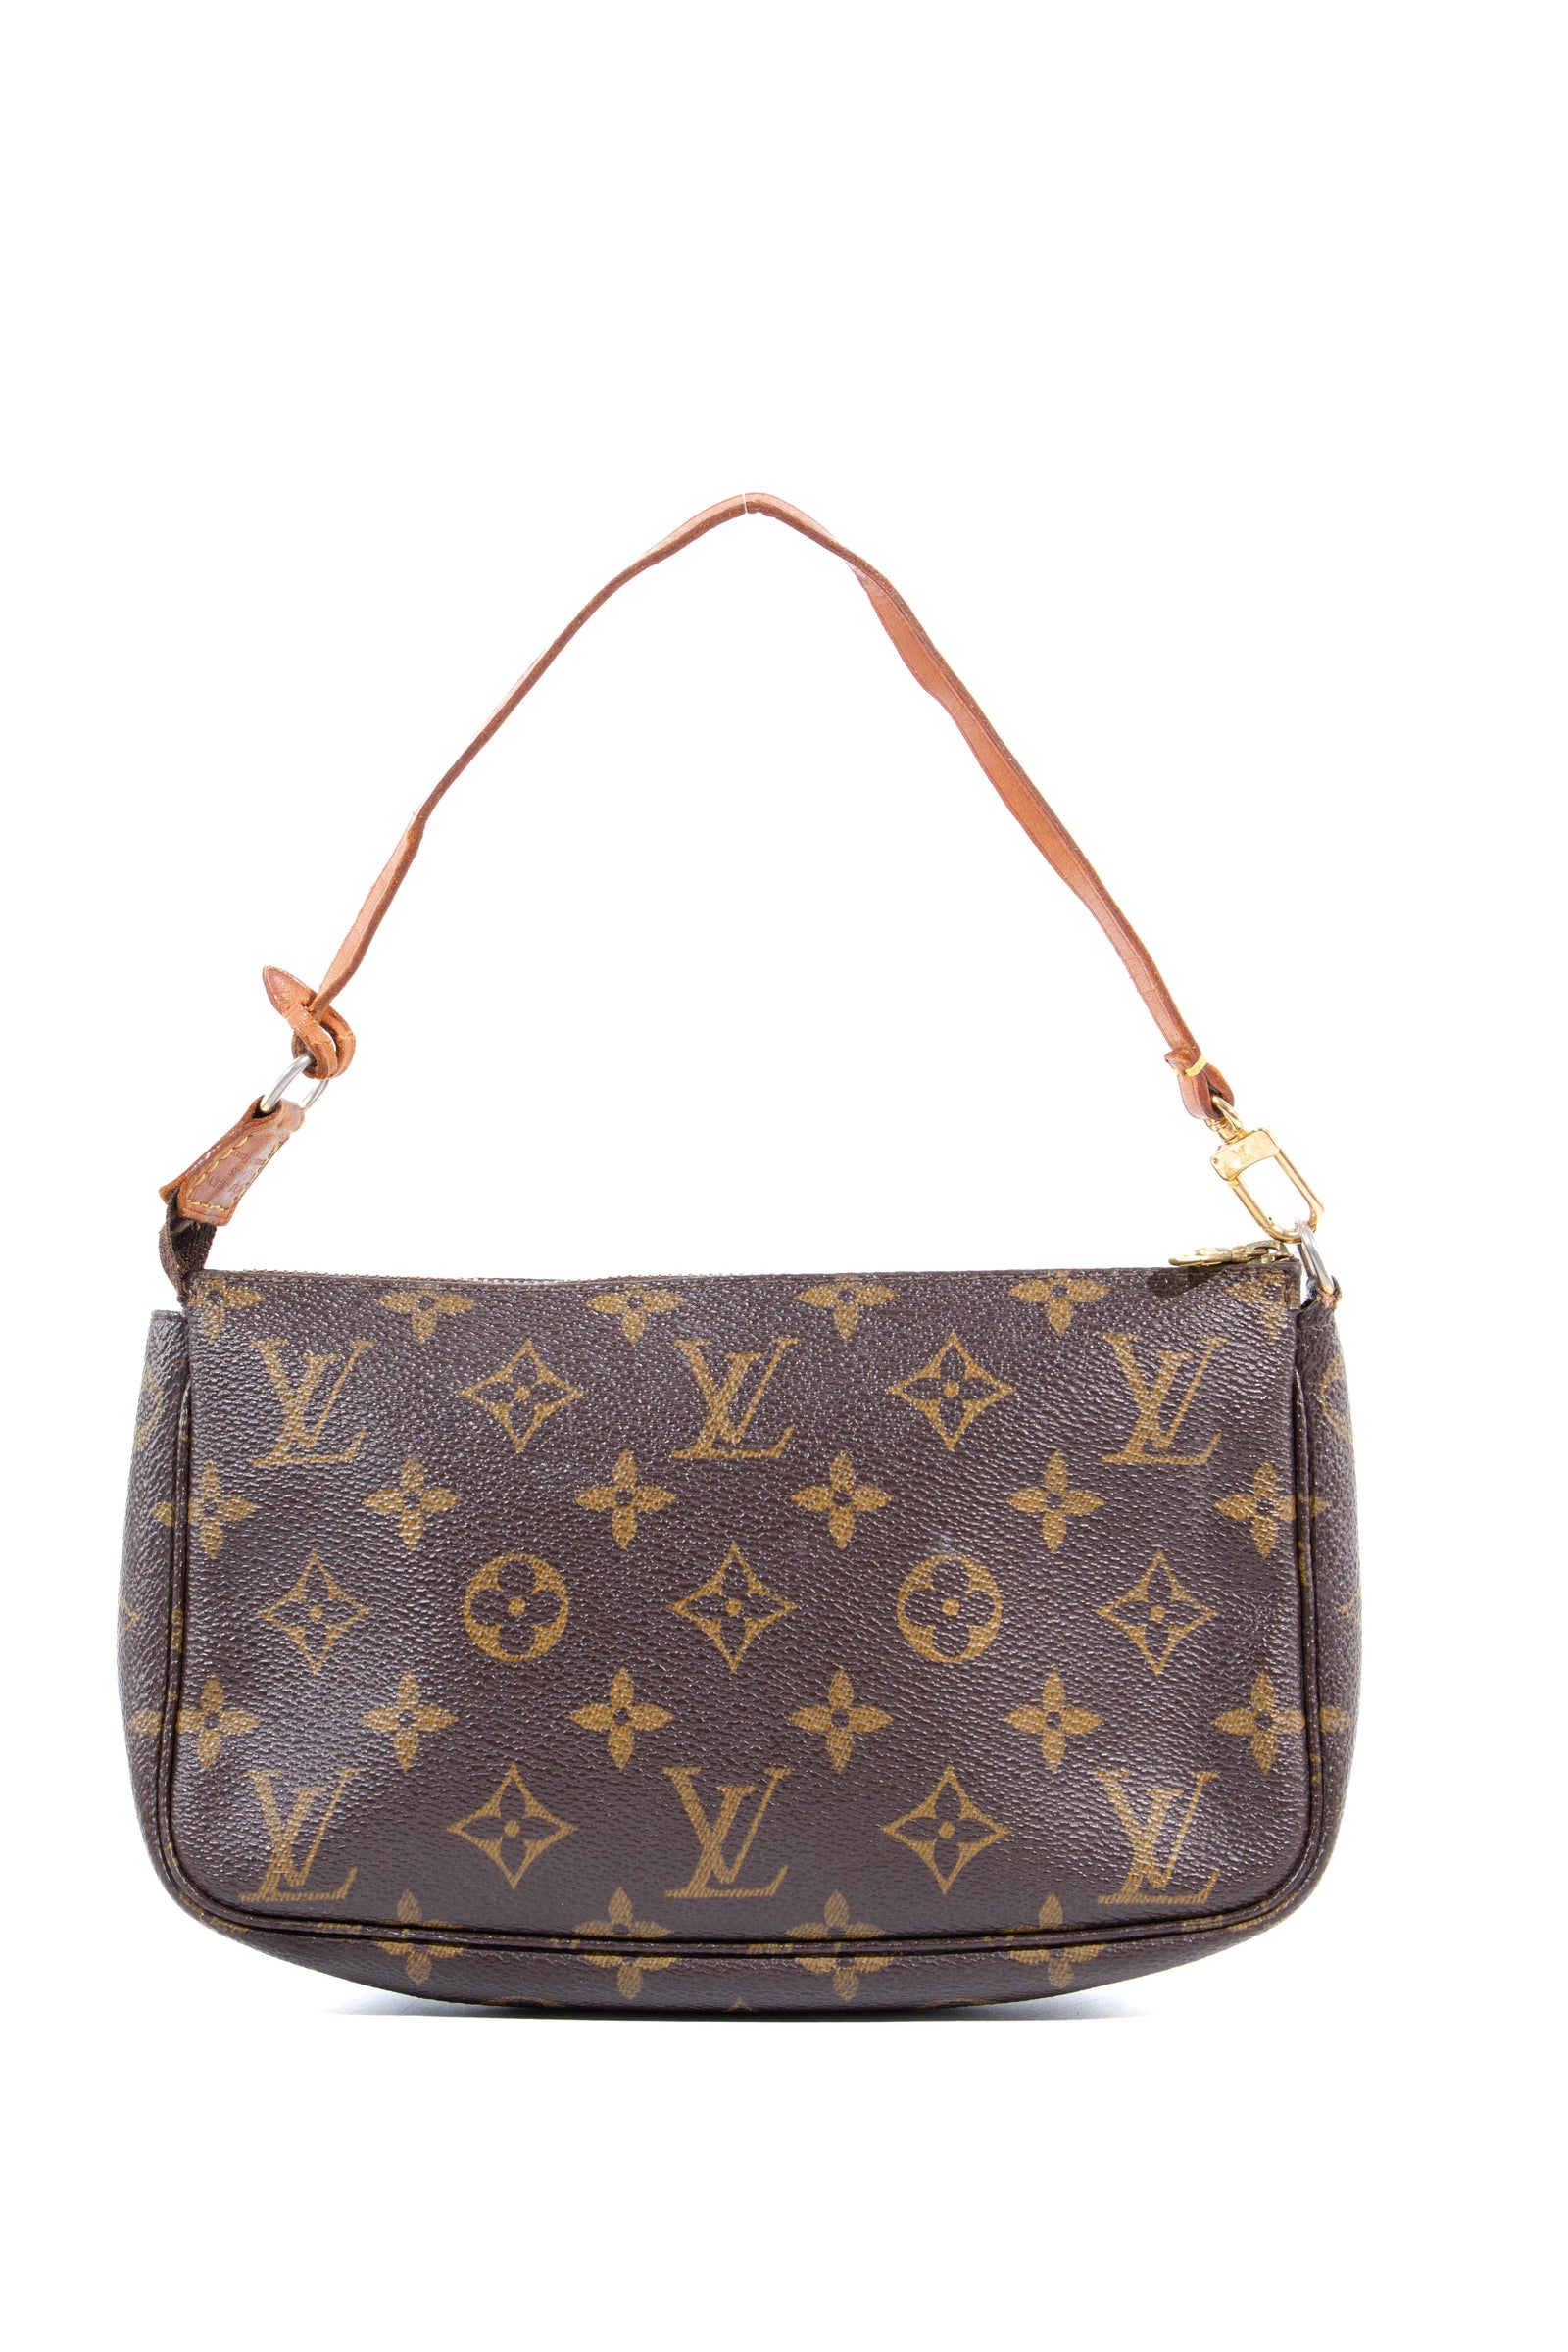 Louis Vuitton on X: For the devoted travelers. The innovative